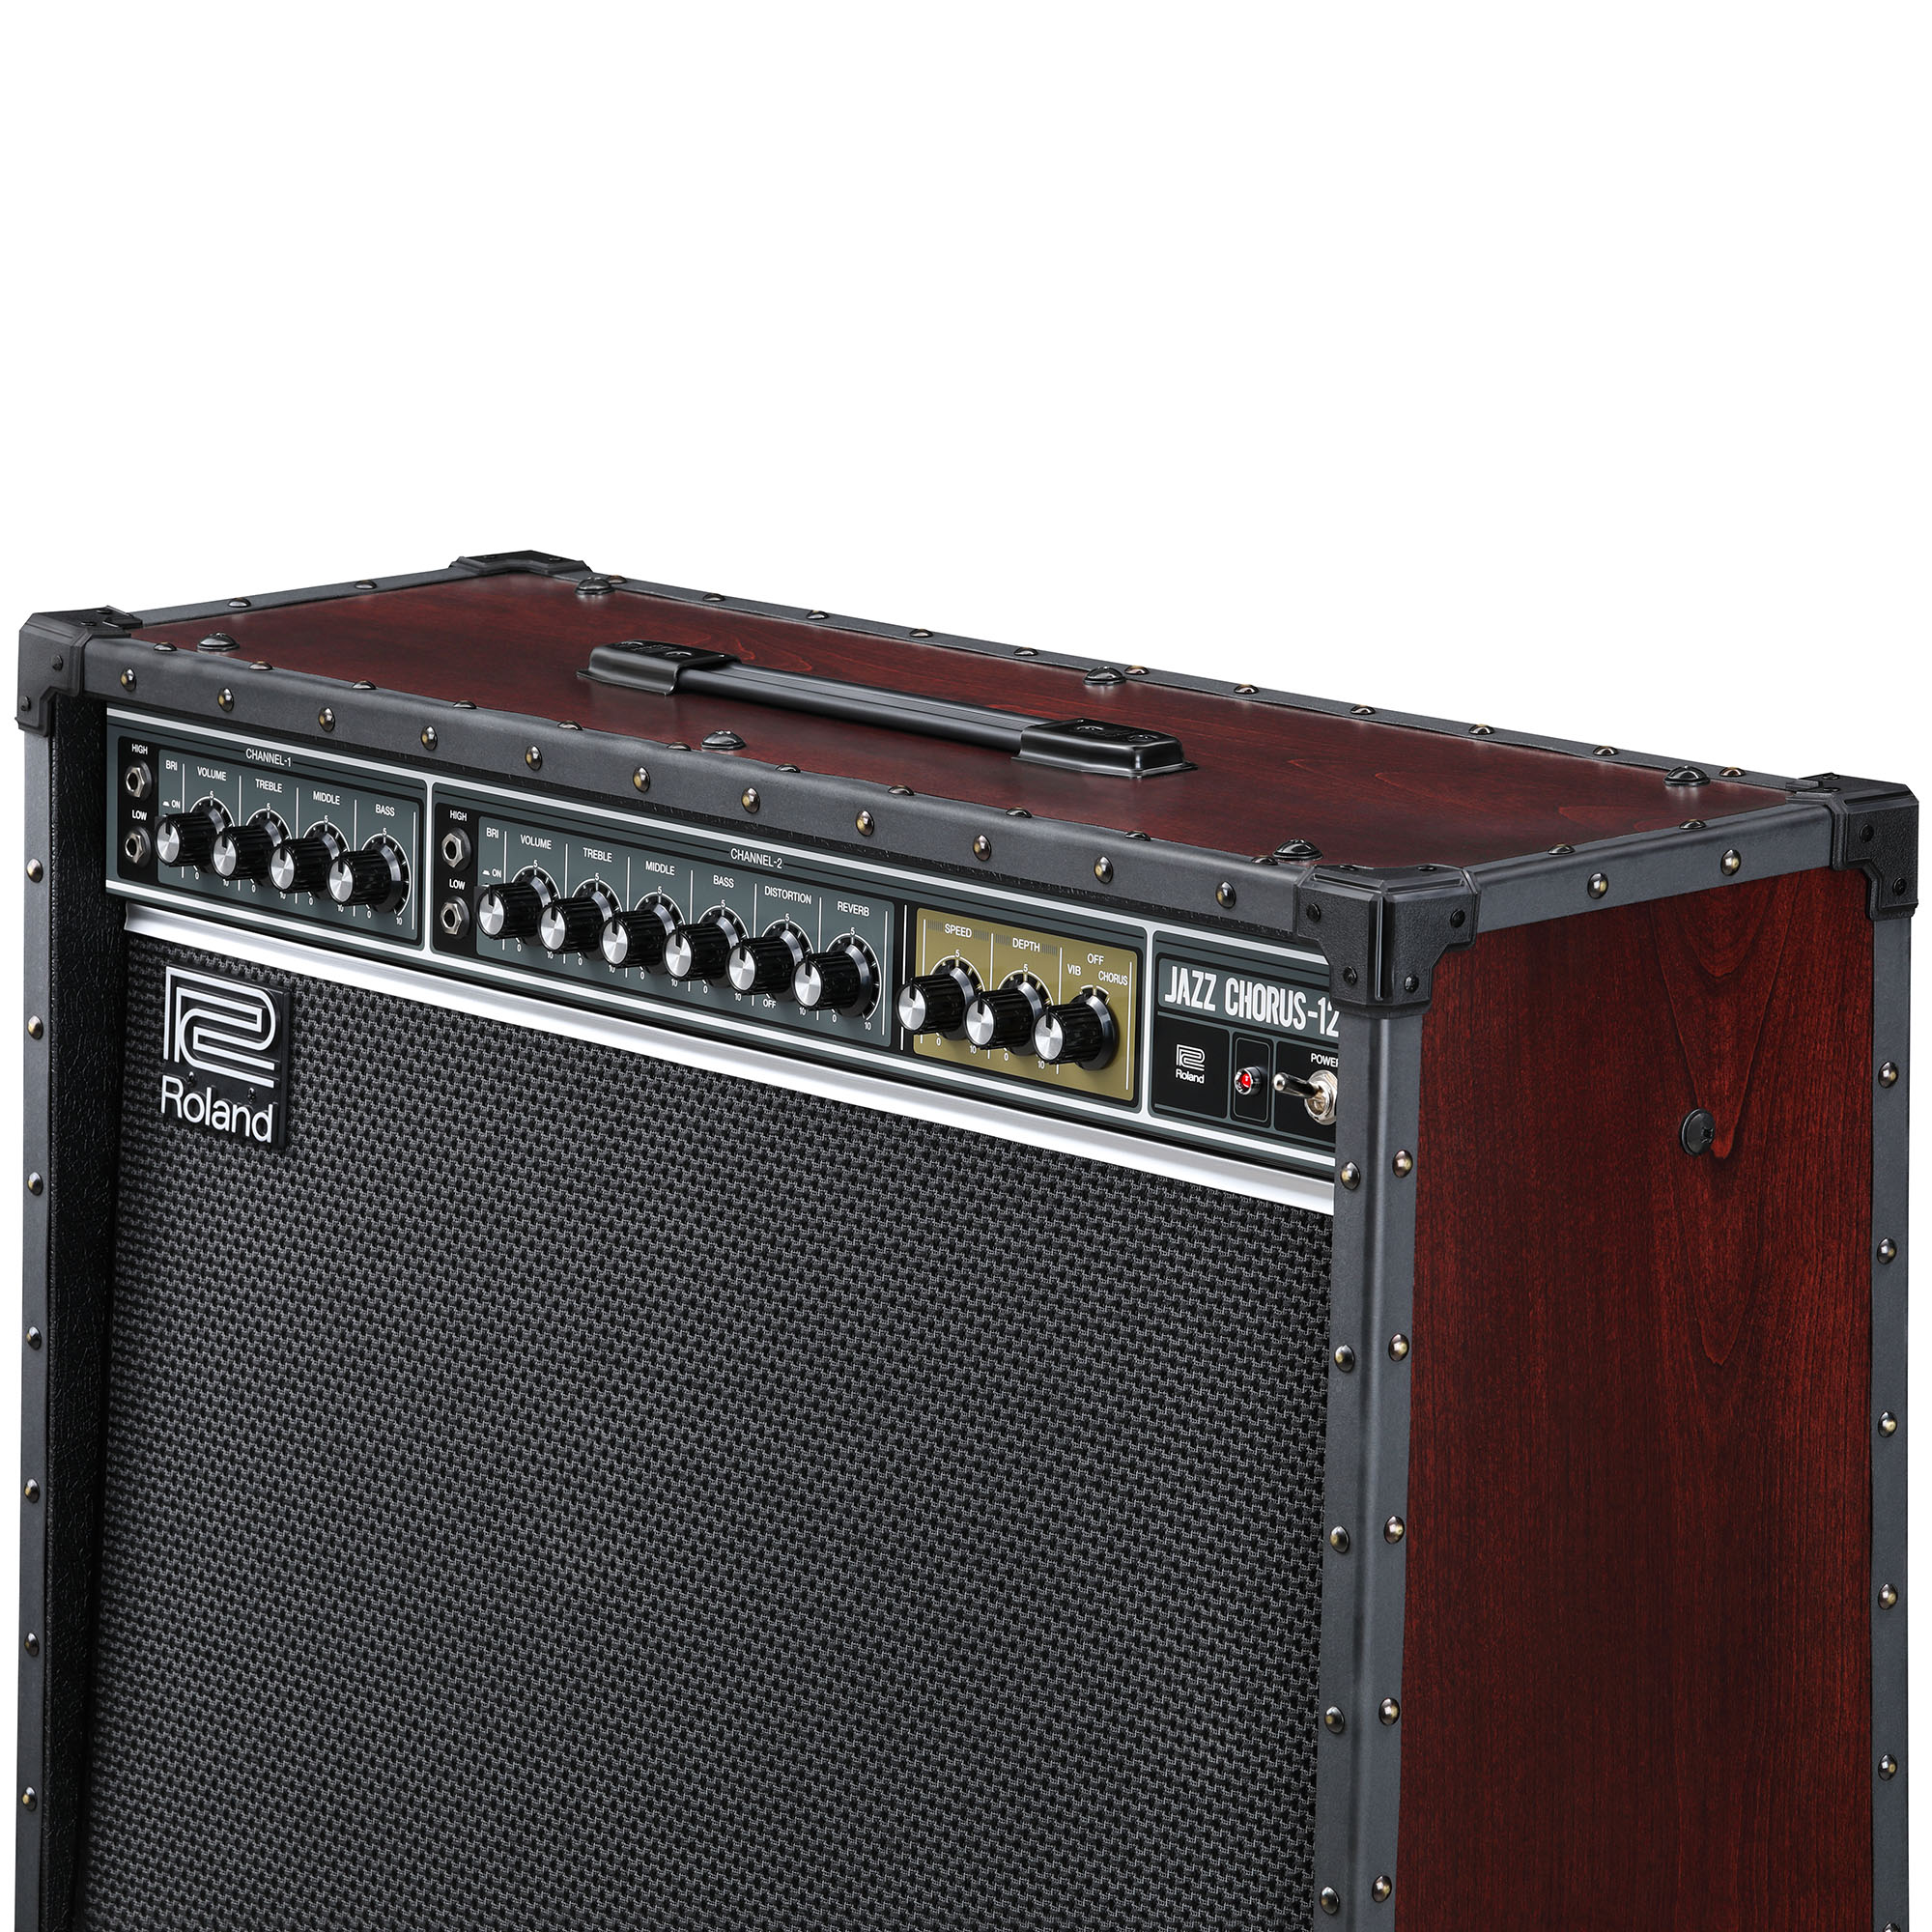 Roland Jc-120 Jazz Chorus Limited Edition 120w 2x12 - Electric guitar combo amp - Variation 1